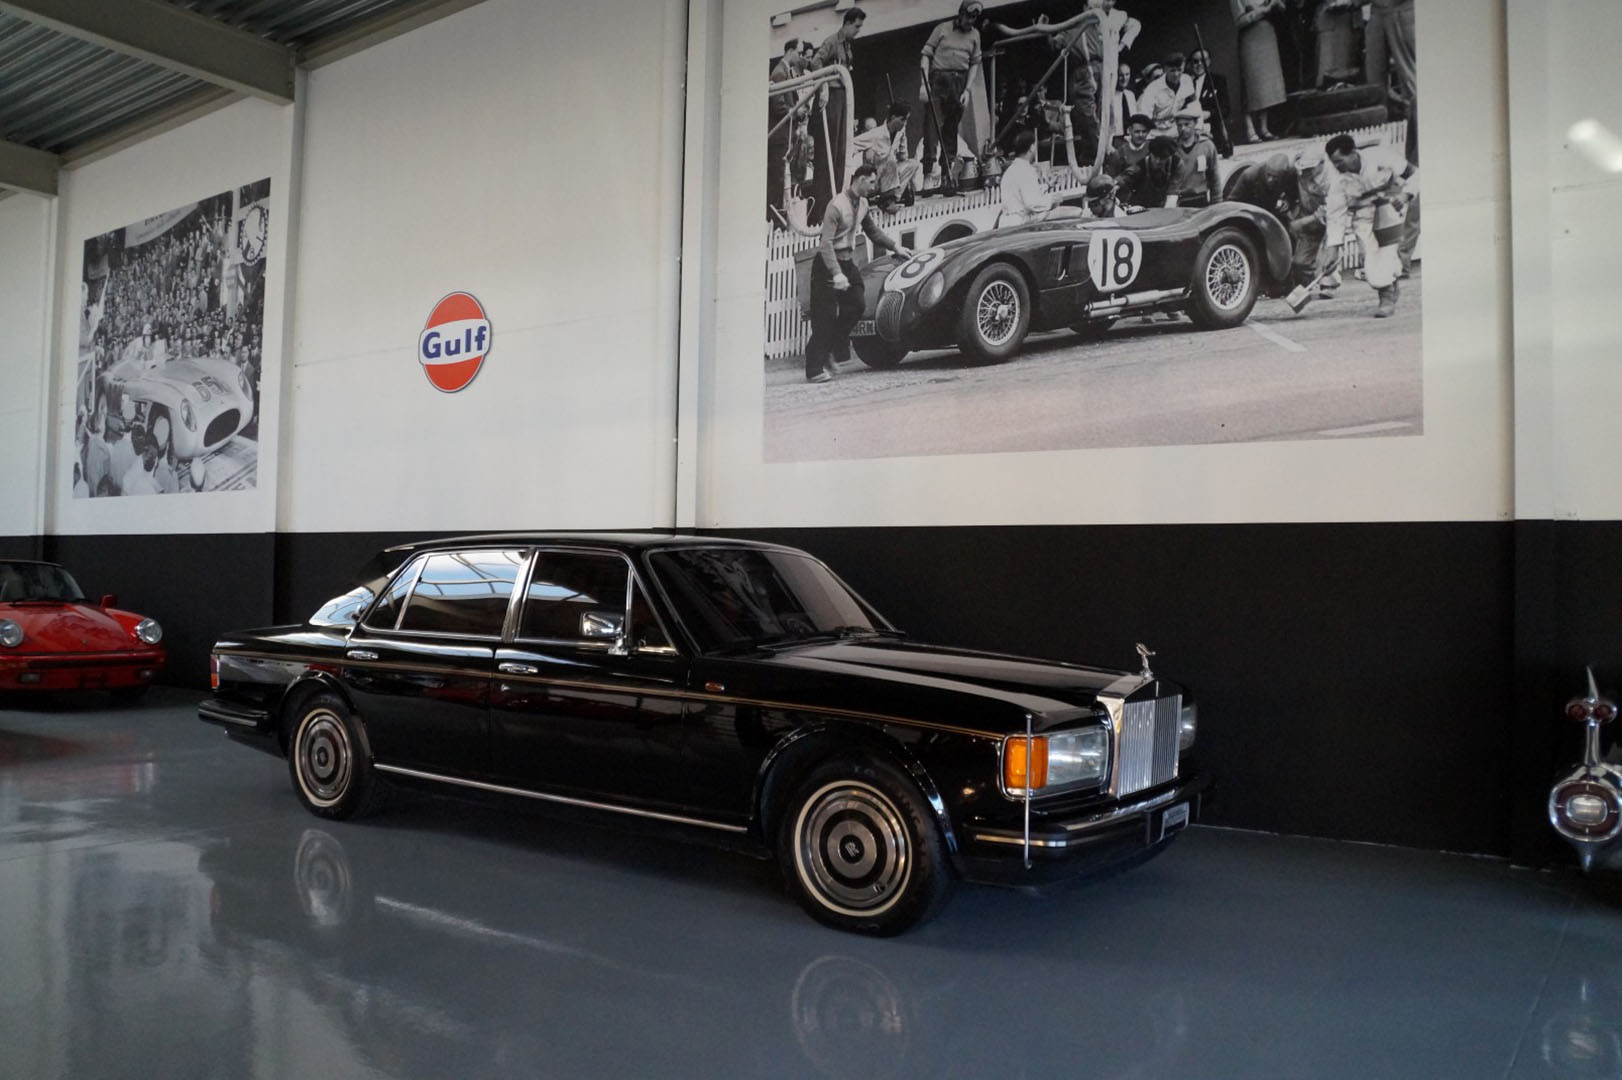 Buy this Rolls Royce silver spur   at Legendary Classics